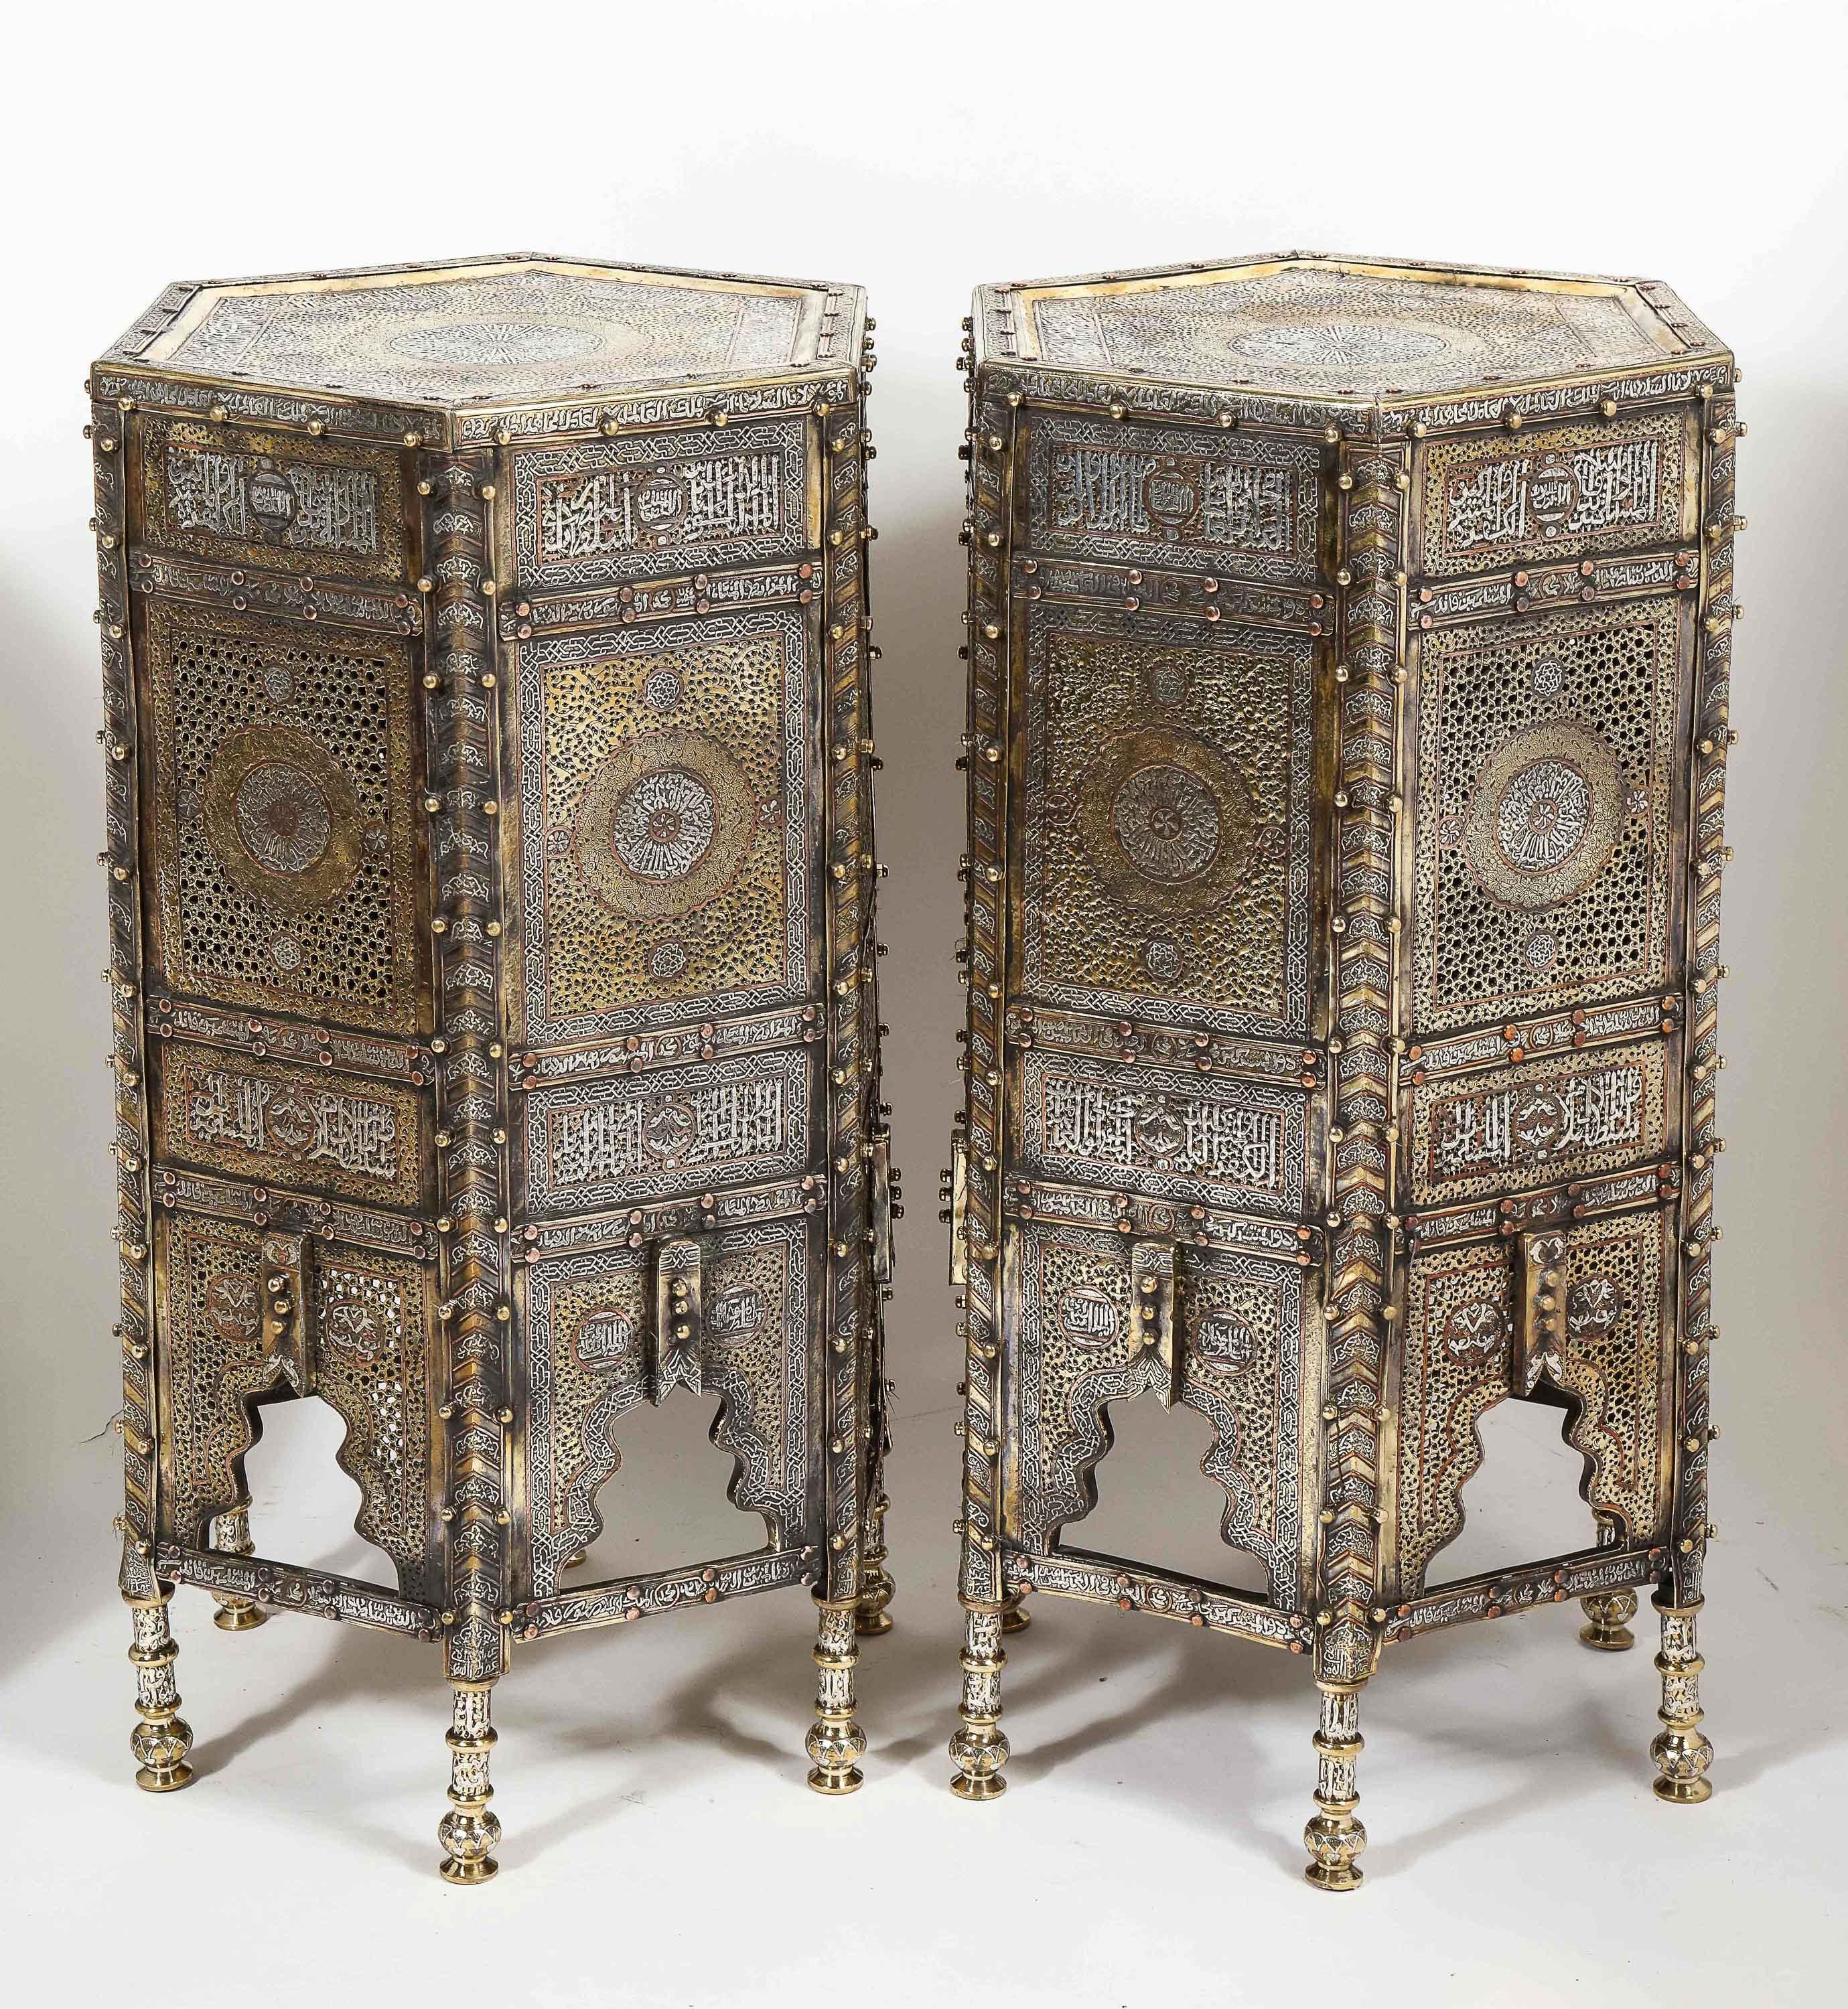 Exceptional Pair of Islamic Mamluk Revival Silver Inlaid Quran Side Tables For Sale 9